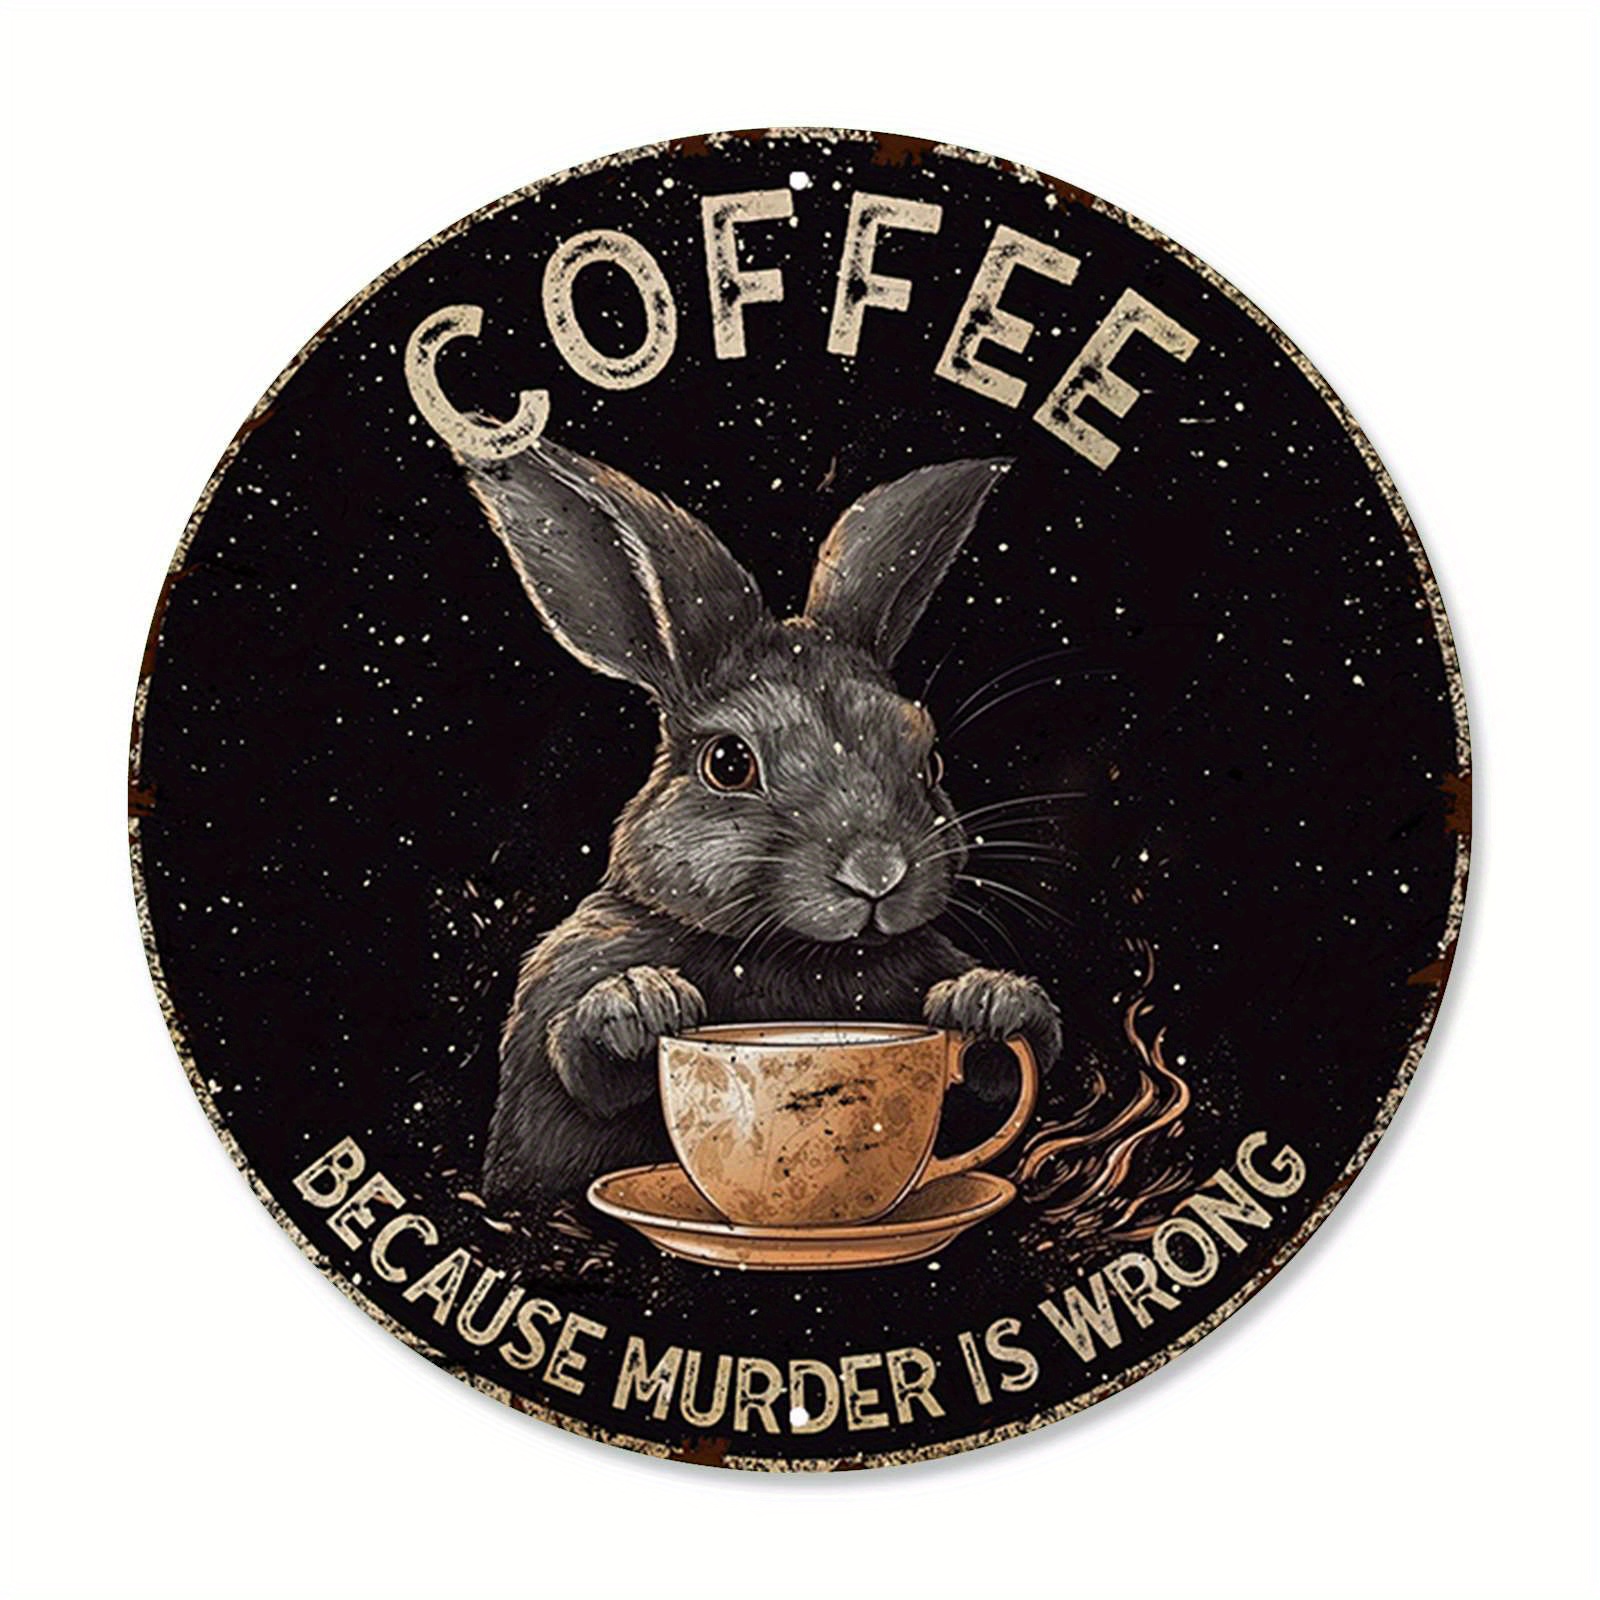 

1pc 8x8 Inch (20x20cm) Round Aluminum Sign Coffee Because Murder Is Wrong Funny Rabbit Vintage Round Metal Sign Funny Bar Coffee Sign For Cafe Kitchen Club Bar Home Wall Gift